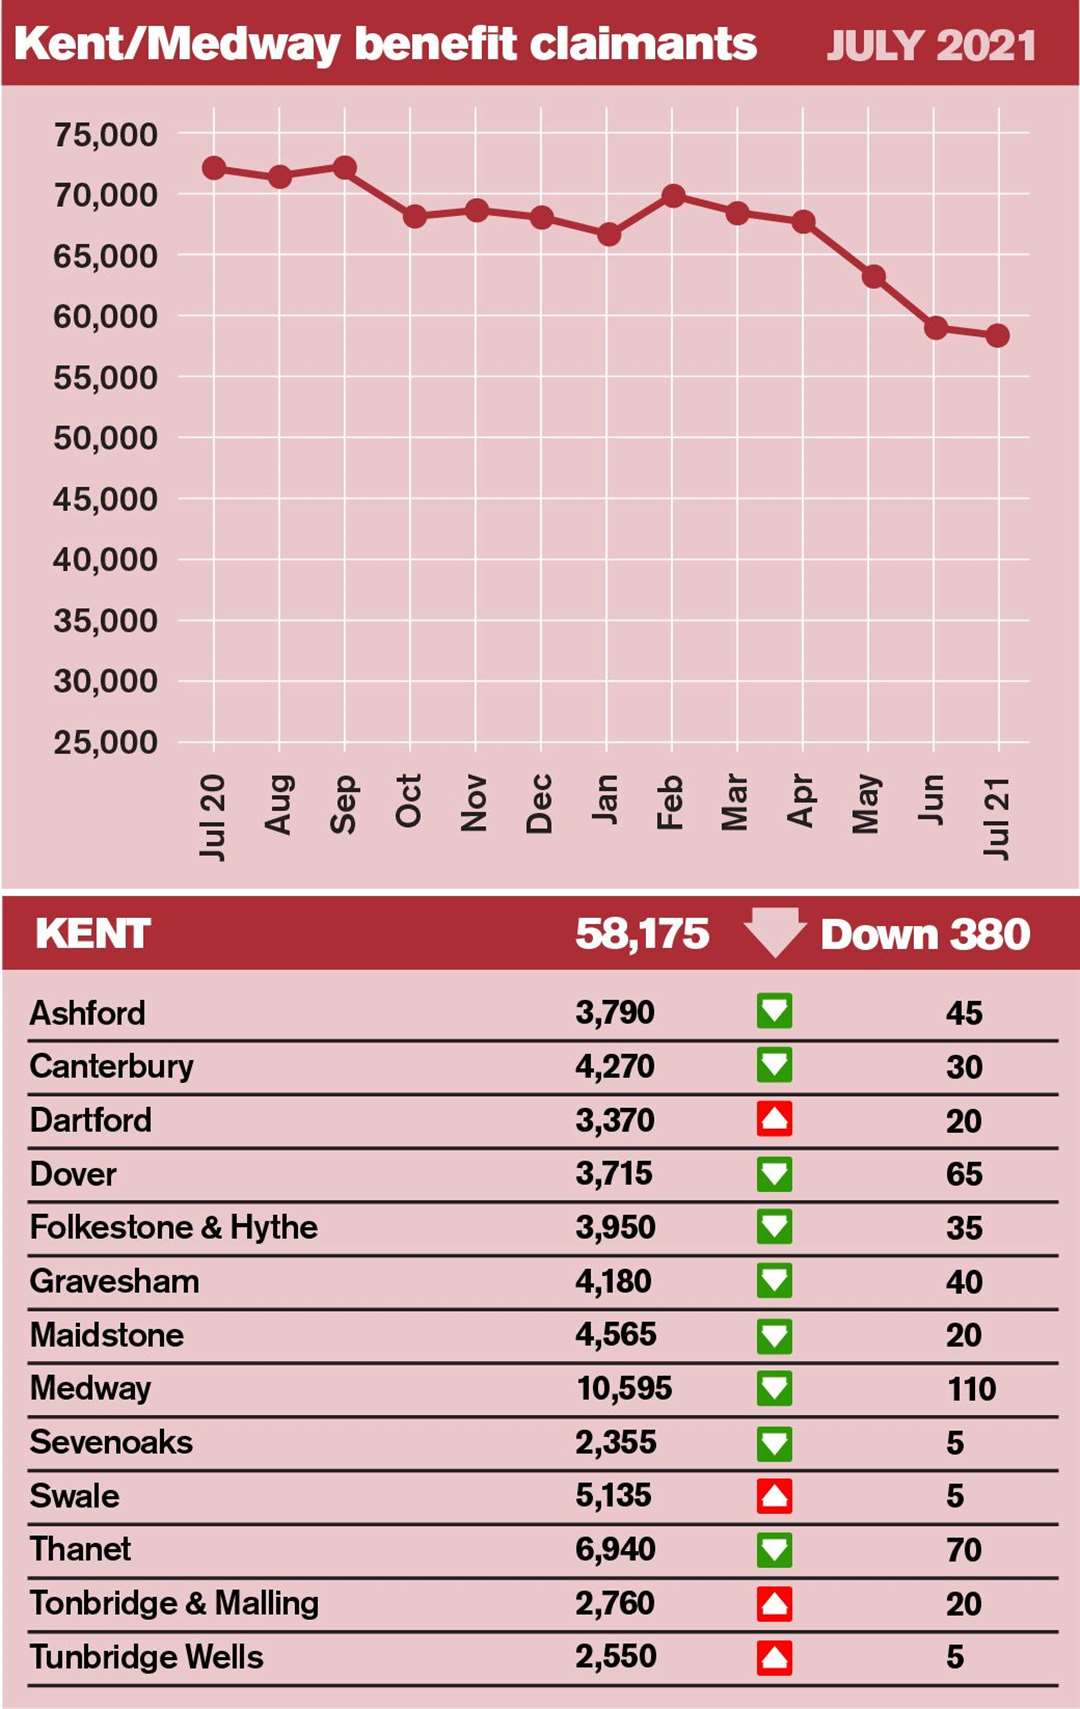 The latest unemployment figures for Kent and Medway